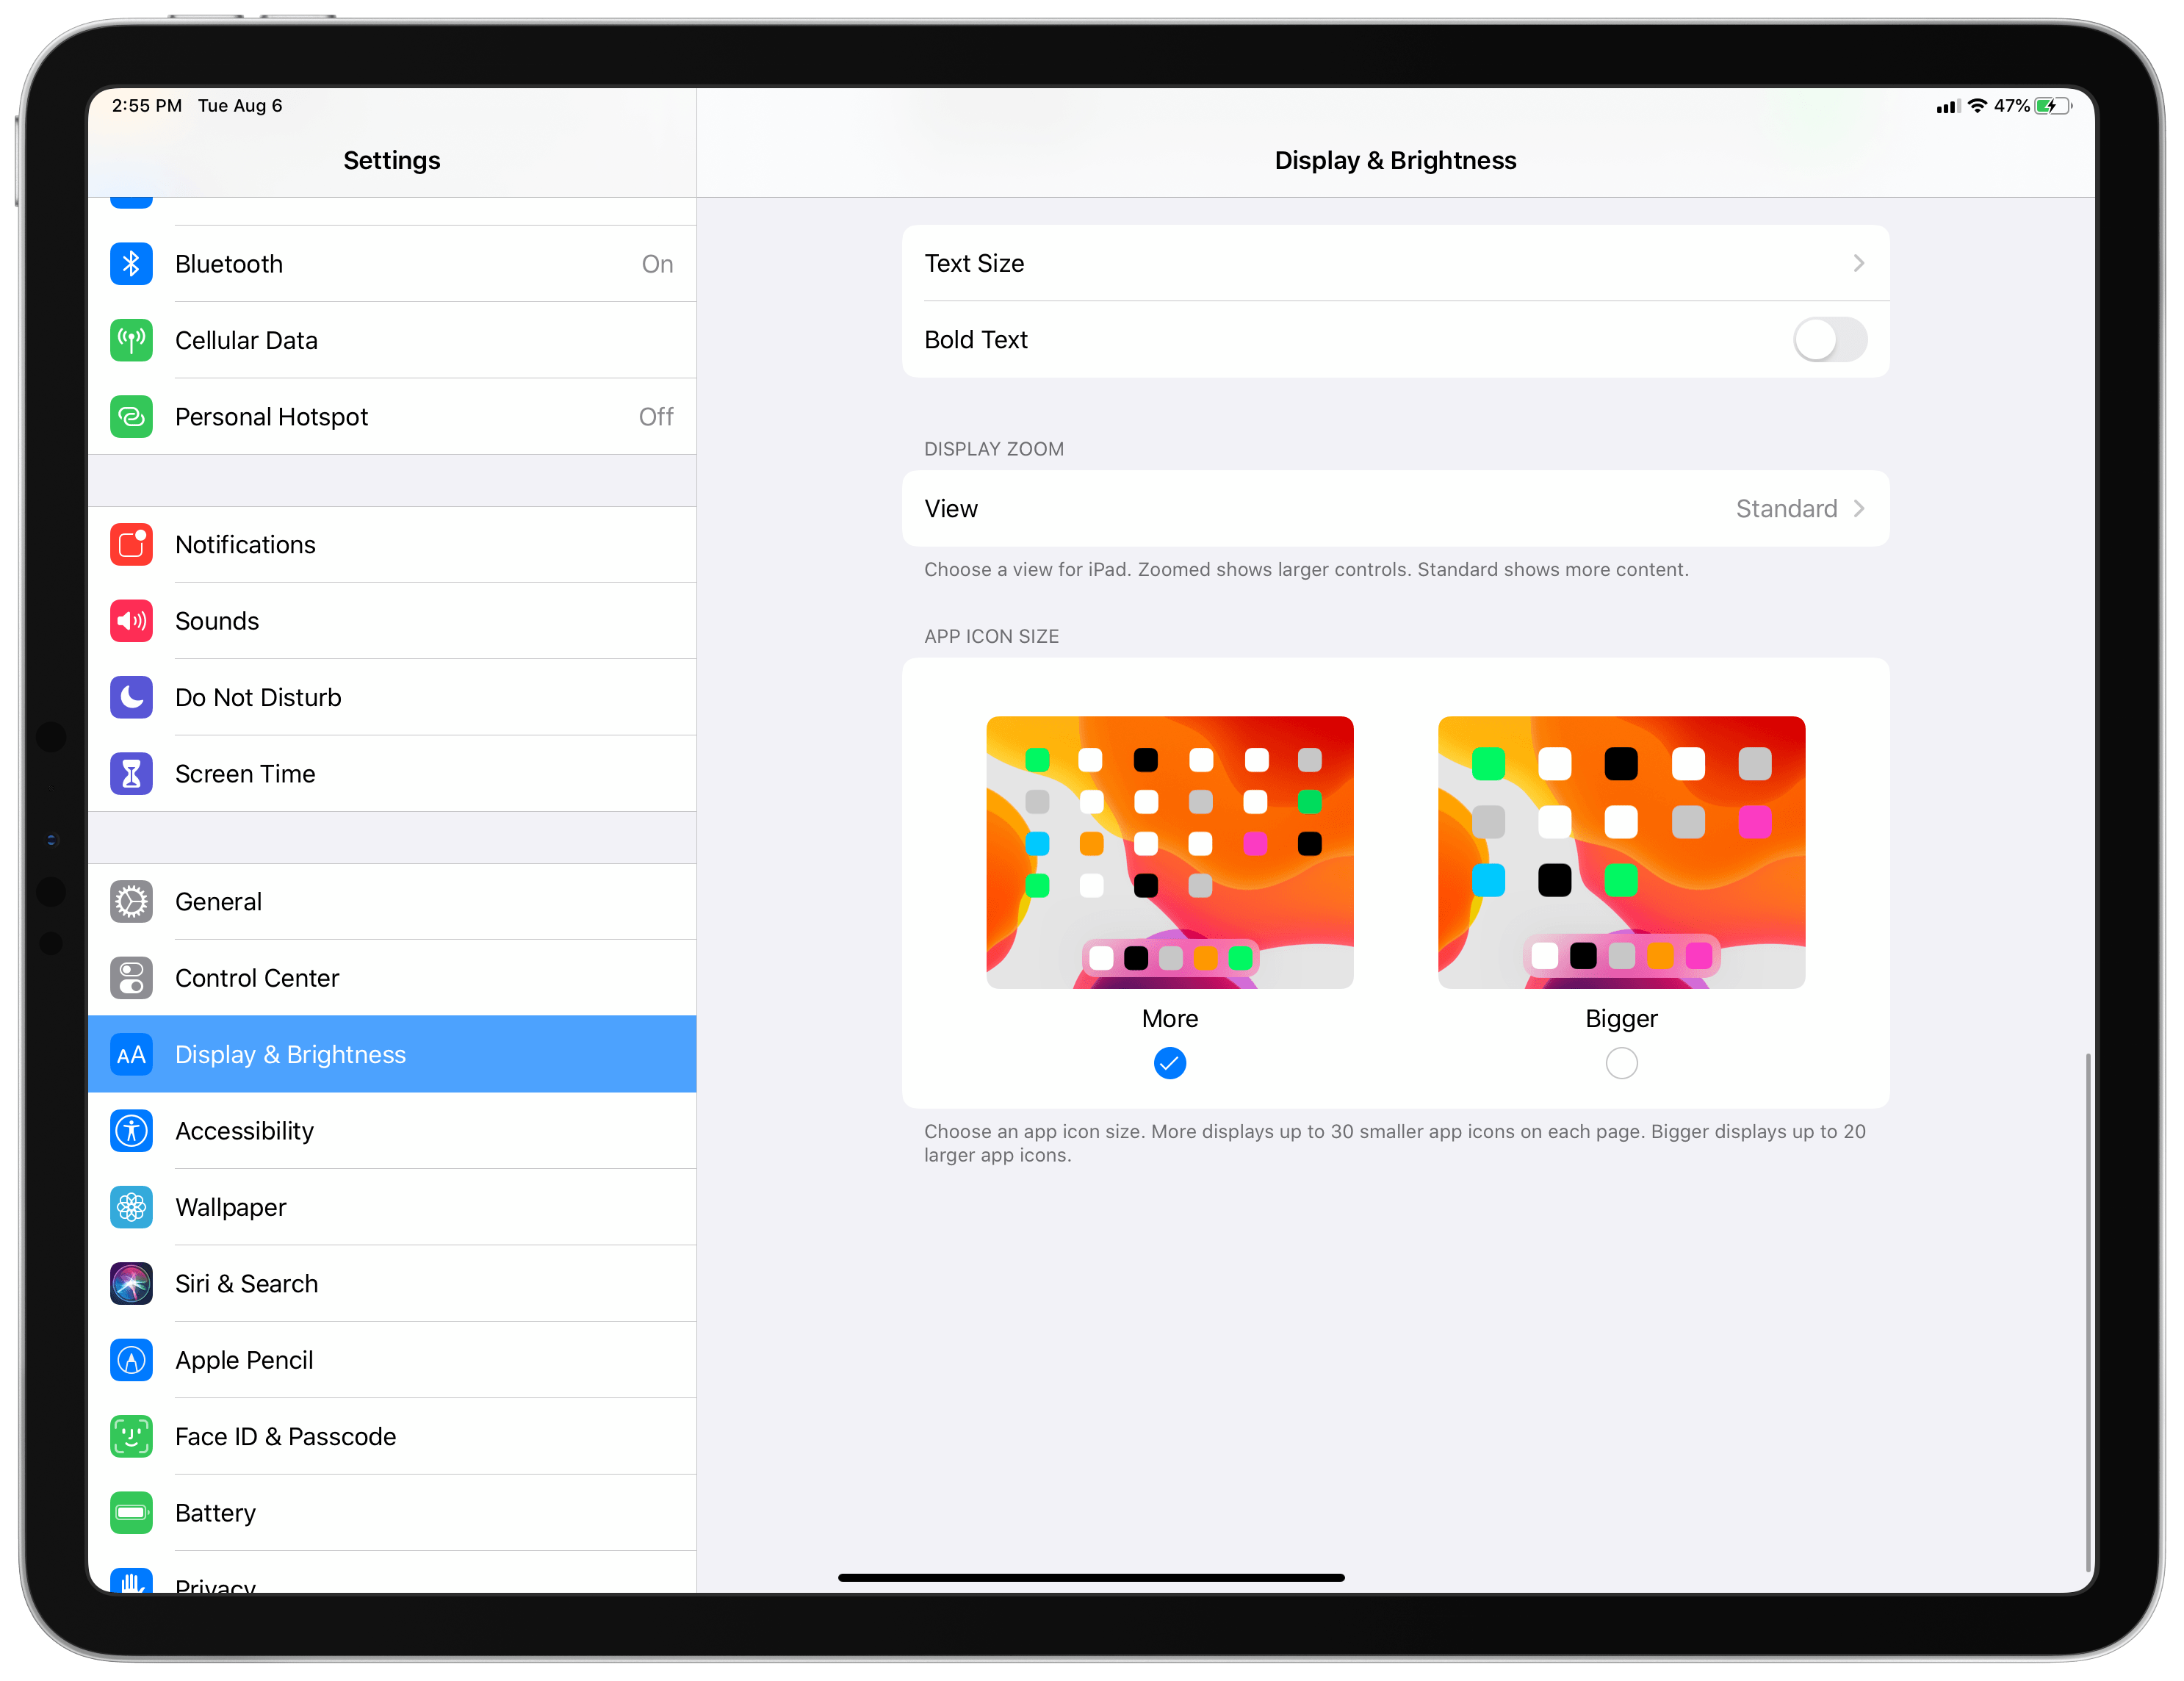 In iPadOS 13 the Home screen can optionally hold more apps than before.